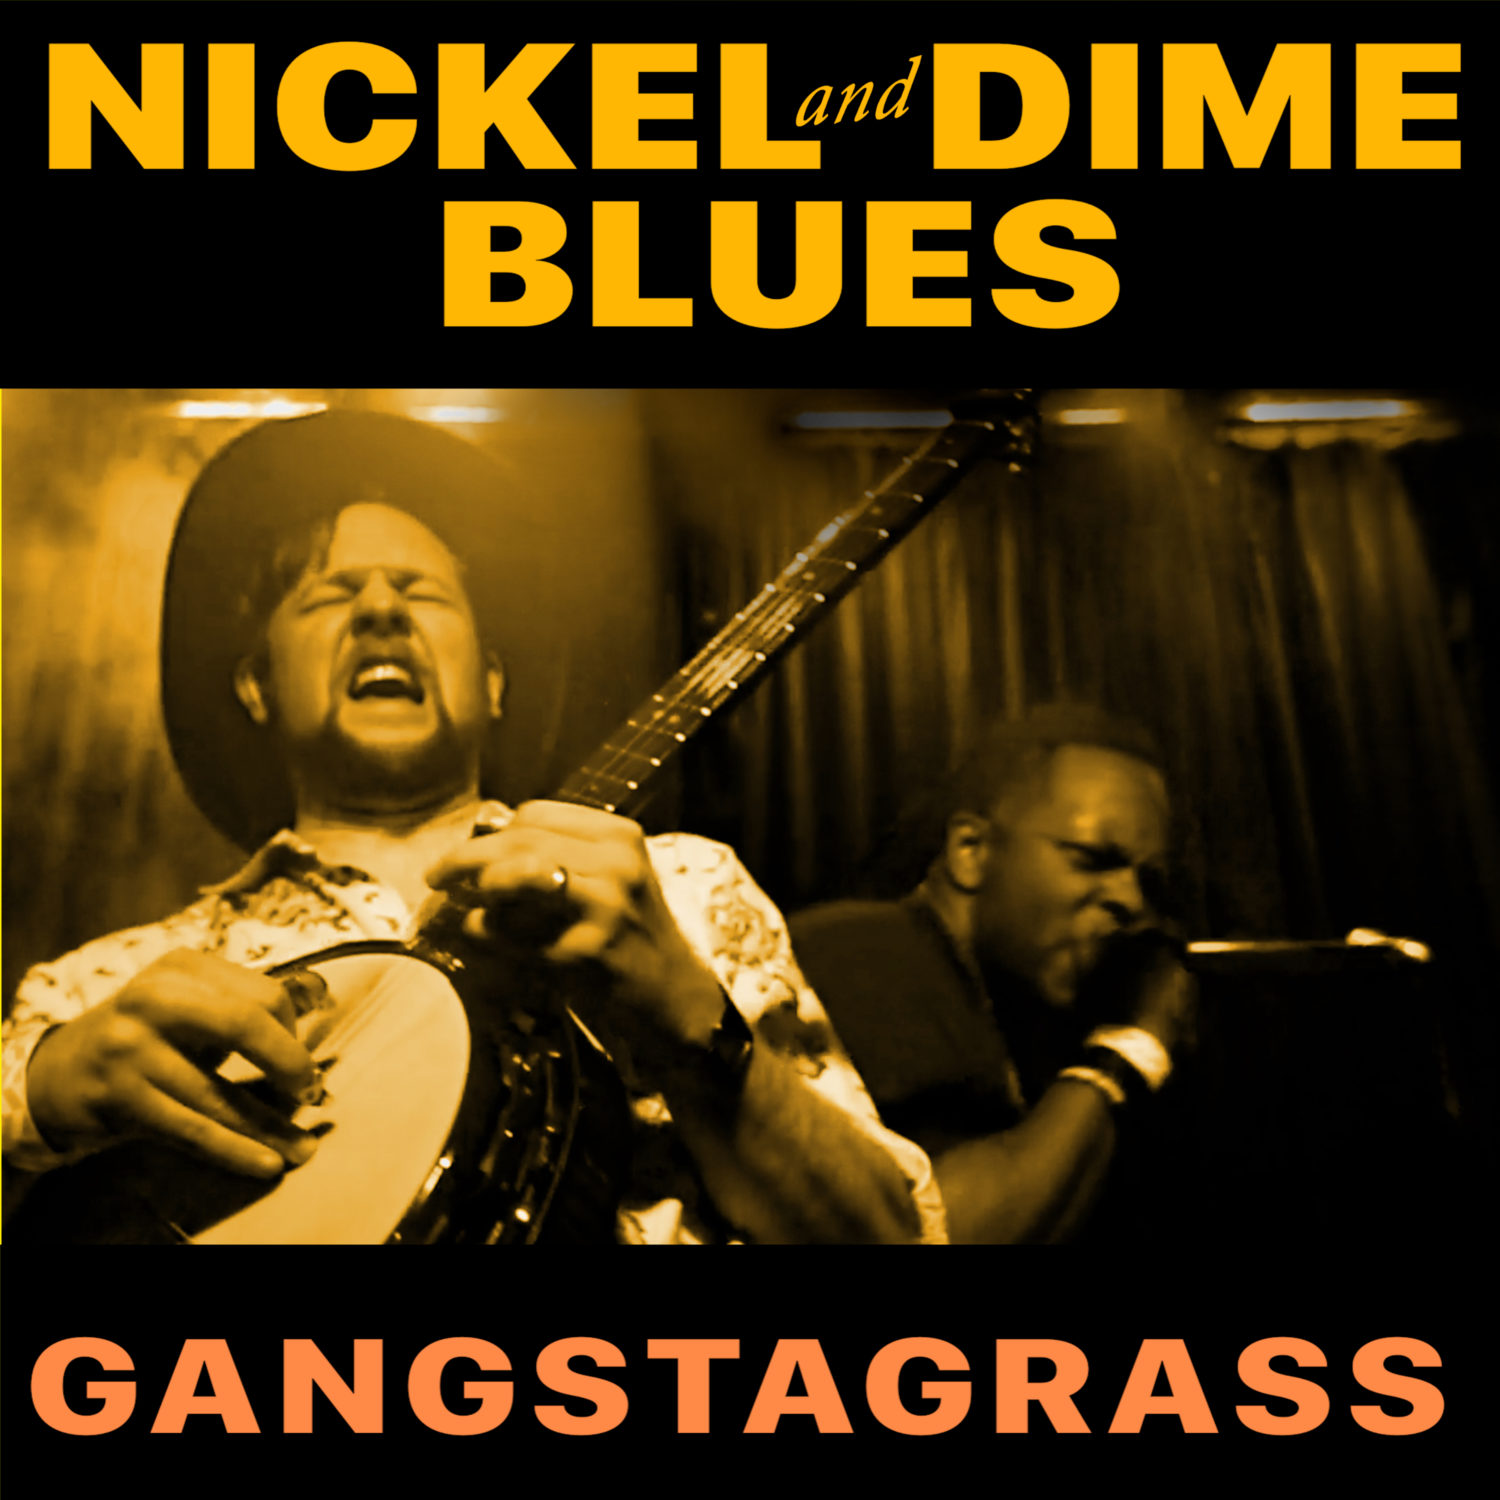 Gangstagrass sparks nickel and dime